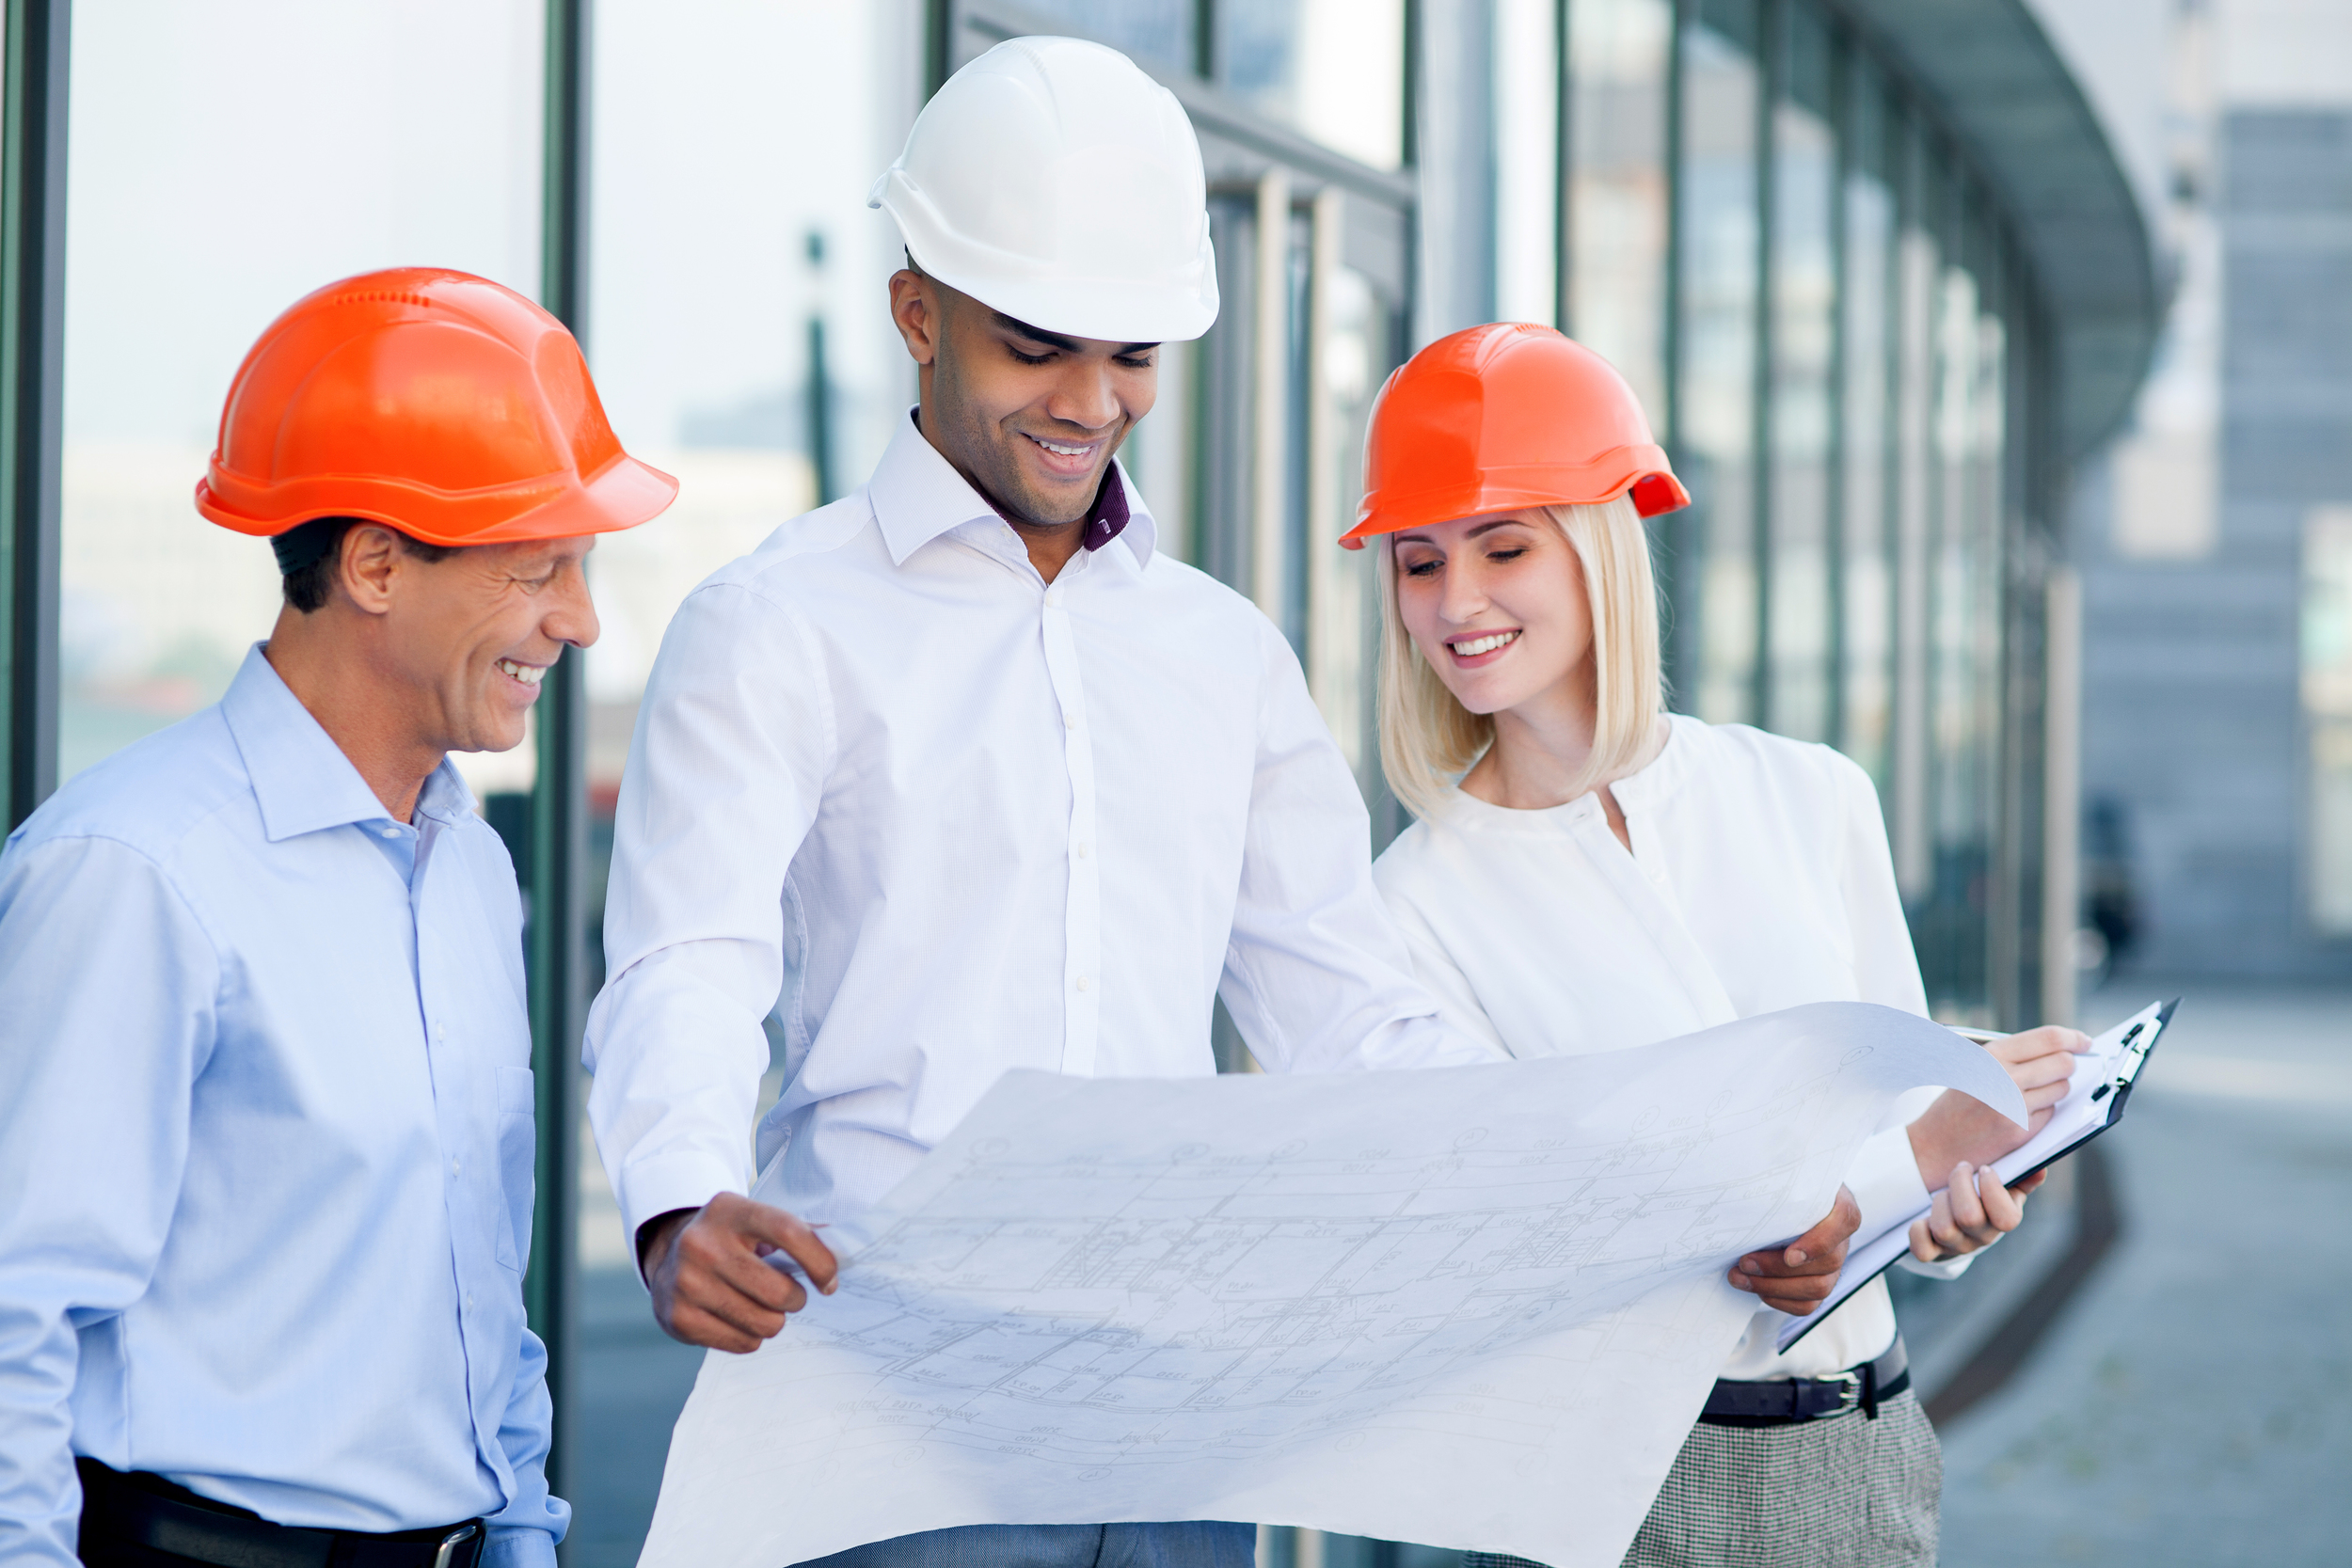 Engineers careers. Construction Foreman man. Pros and cons of the Engineer Profession.